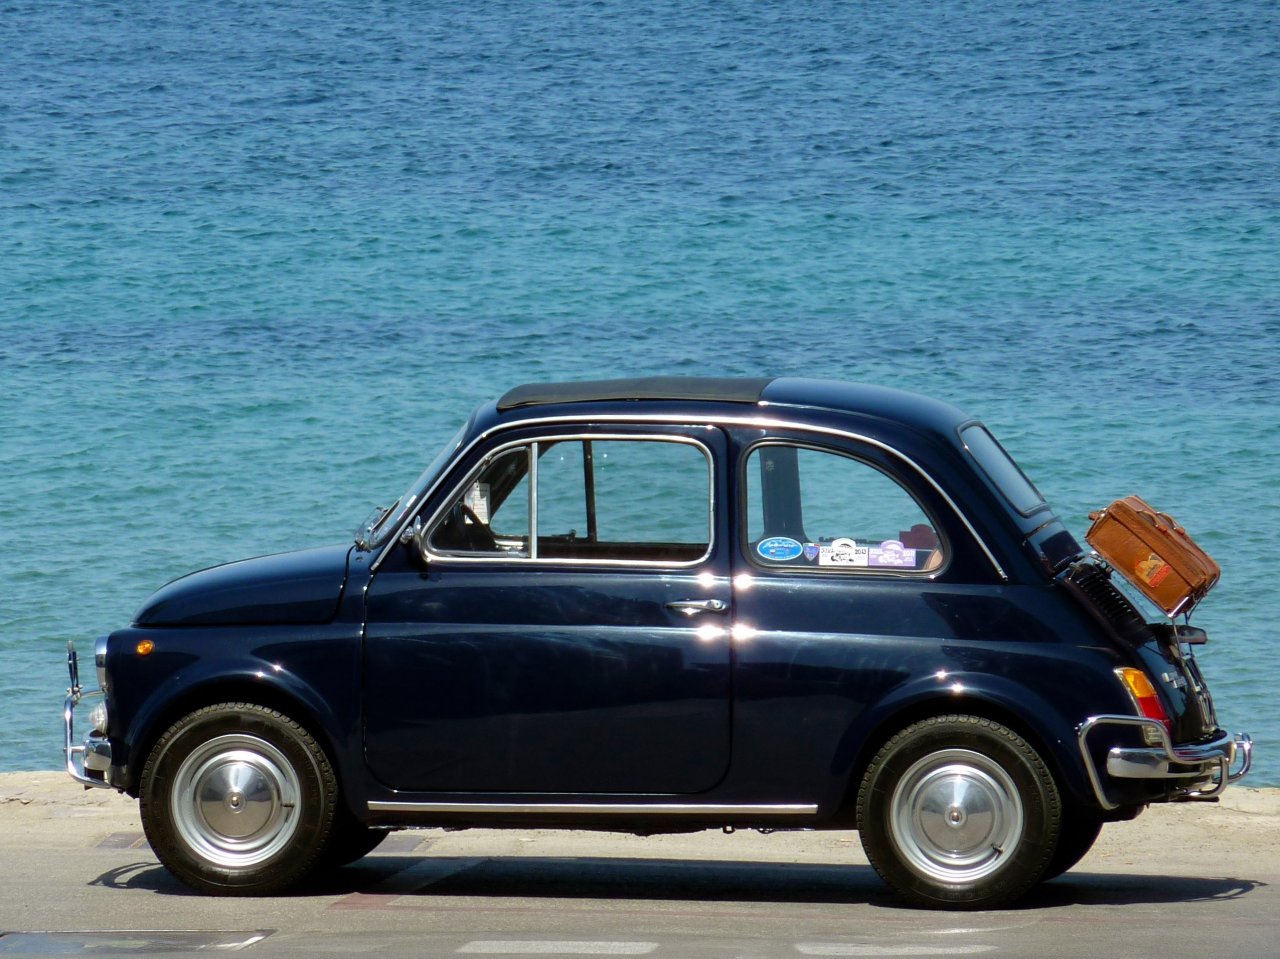 Fiat at the seaside jigsaw puzzle